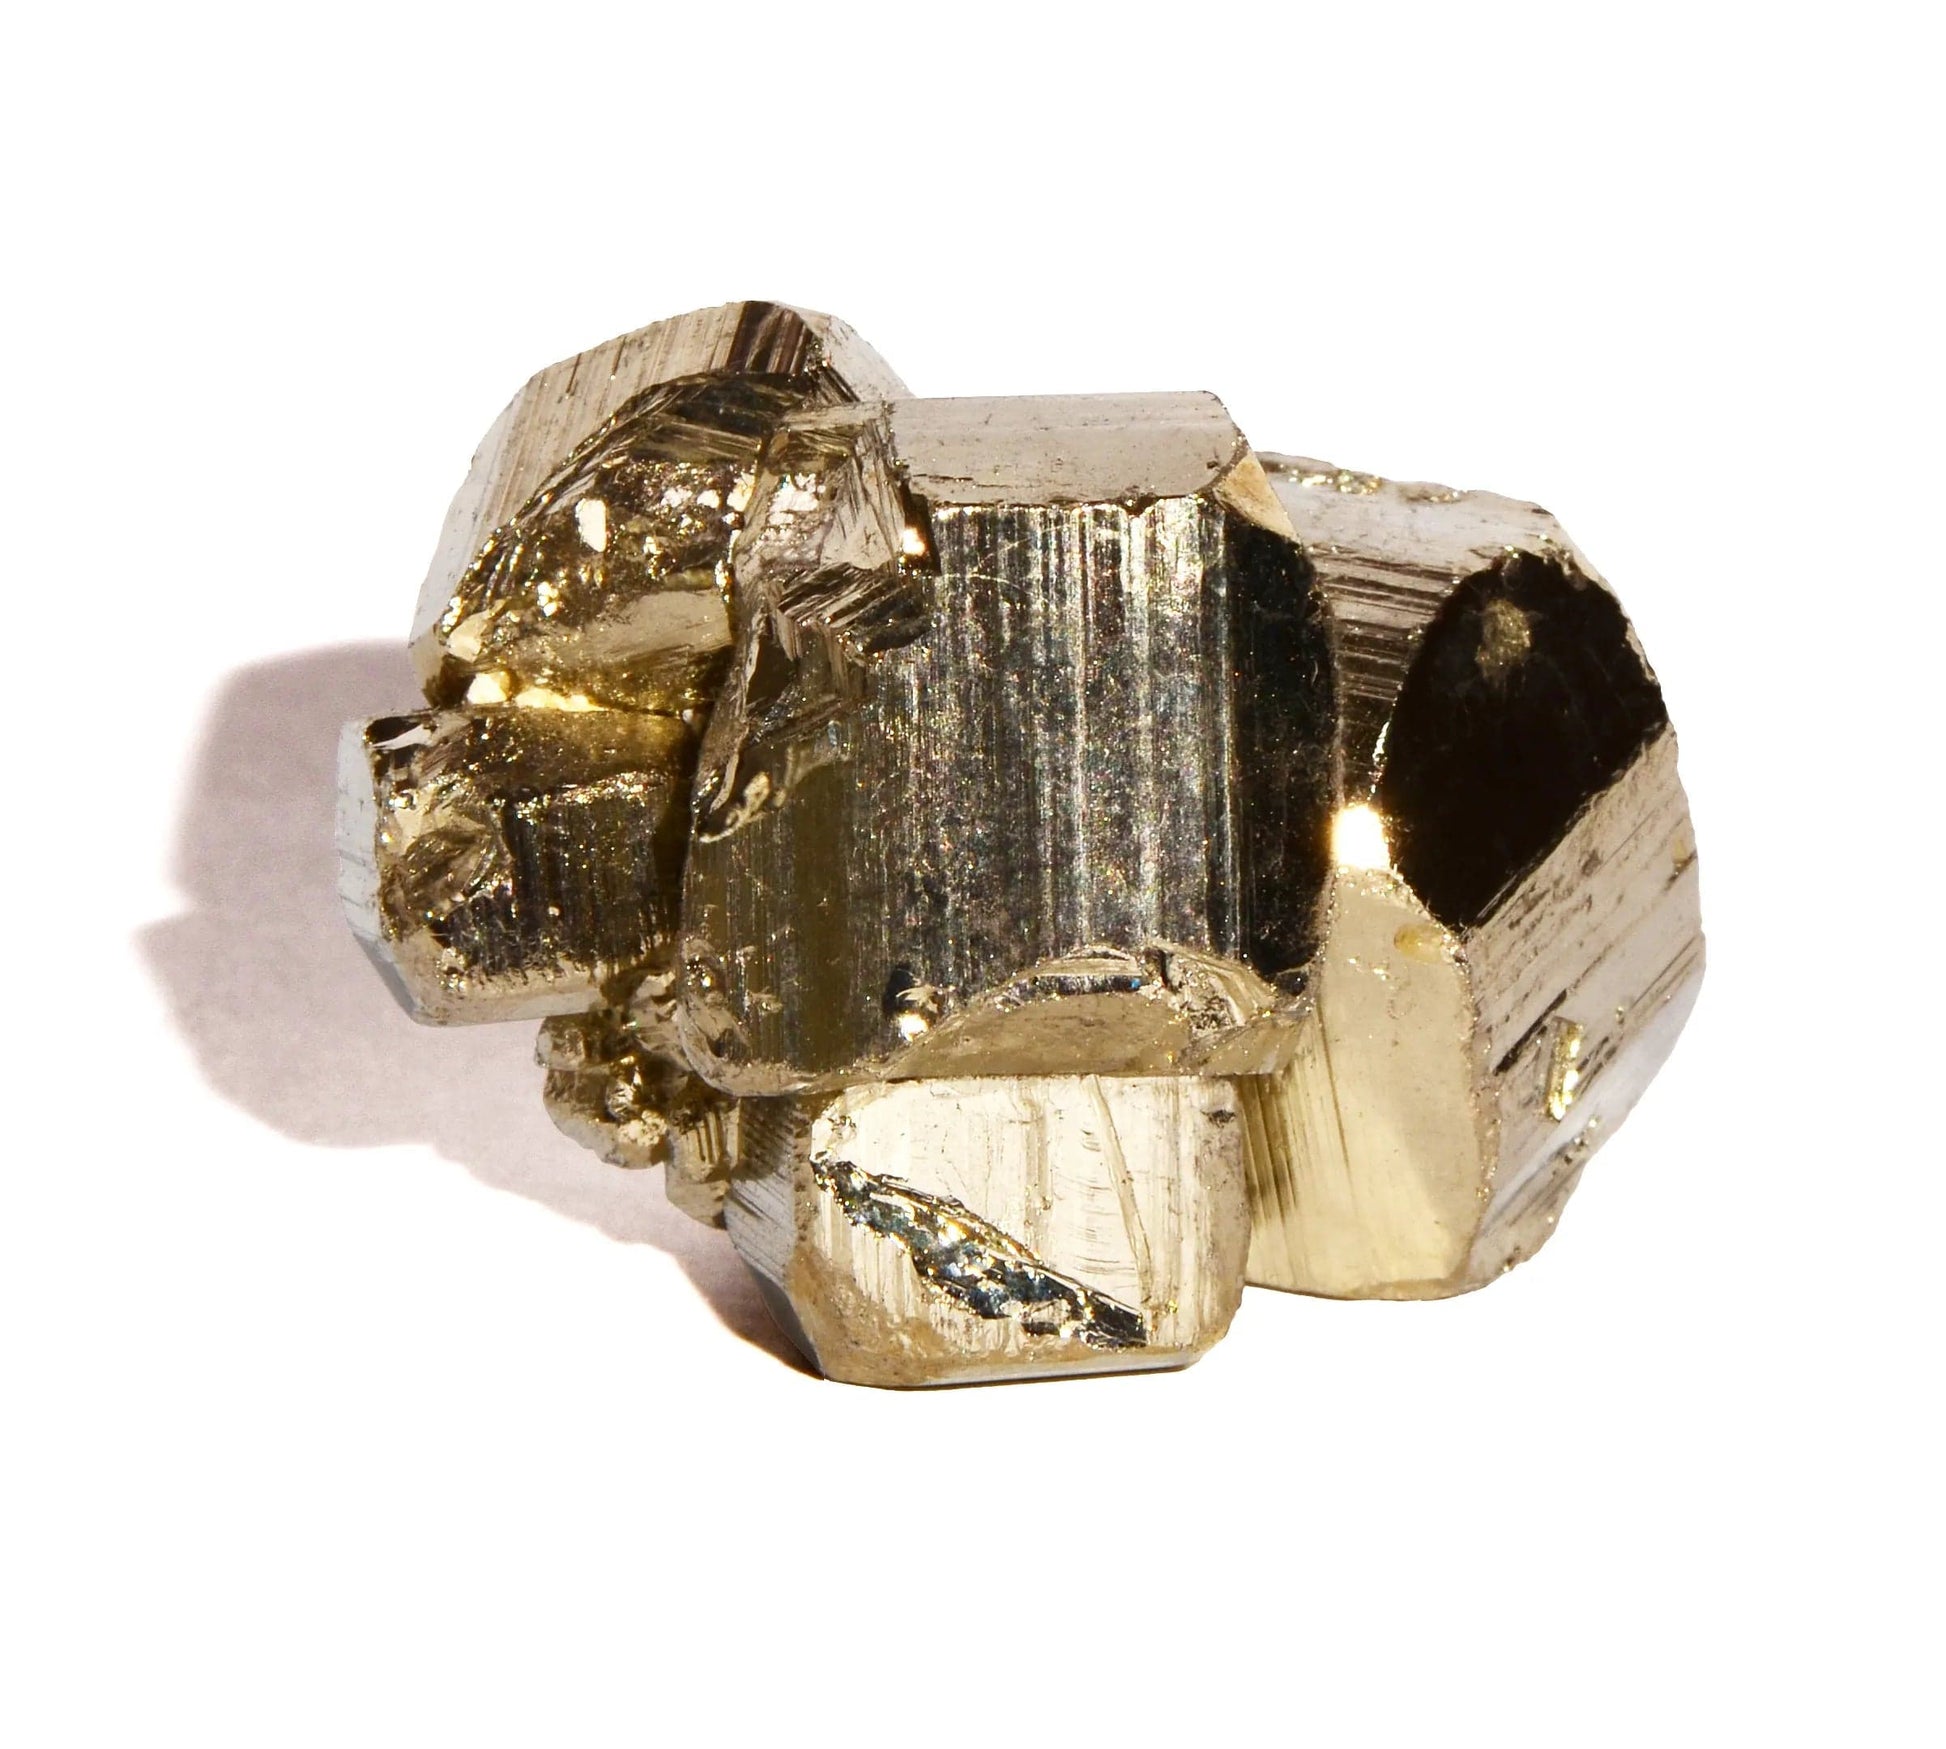 Pyrite Cluster - Raw Form